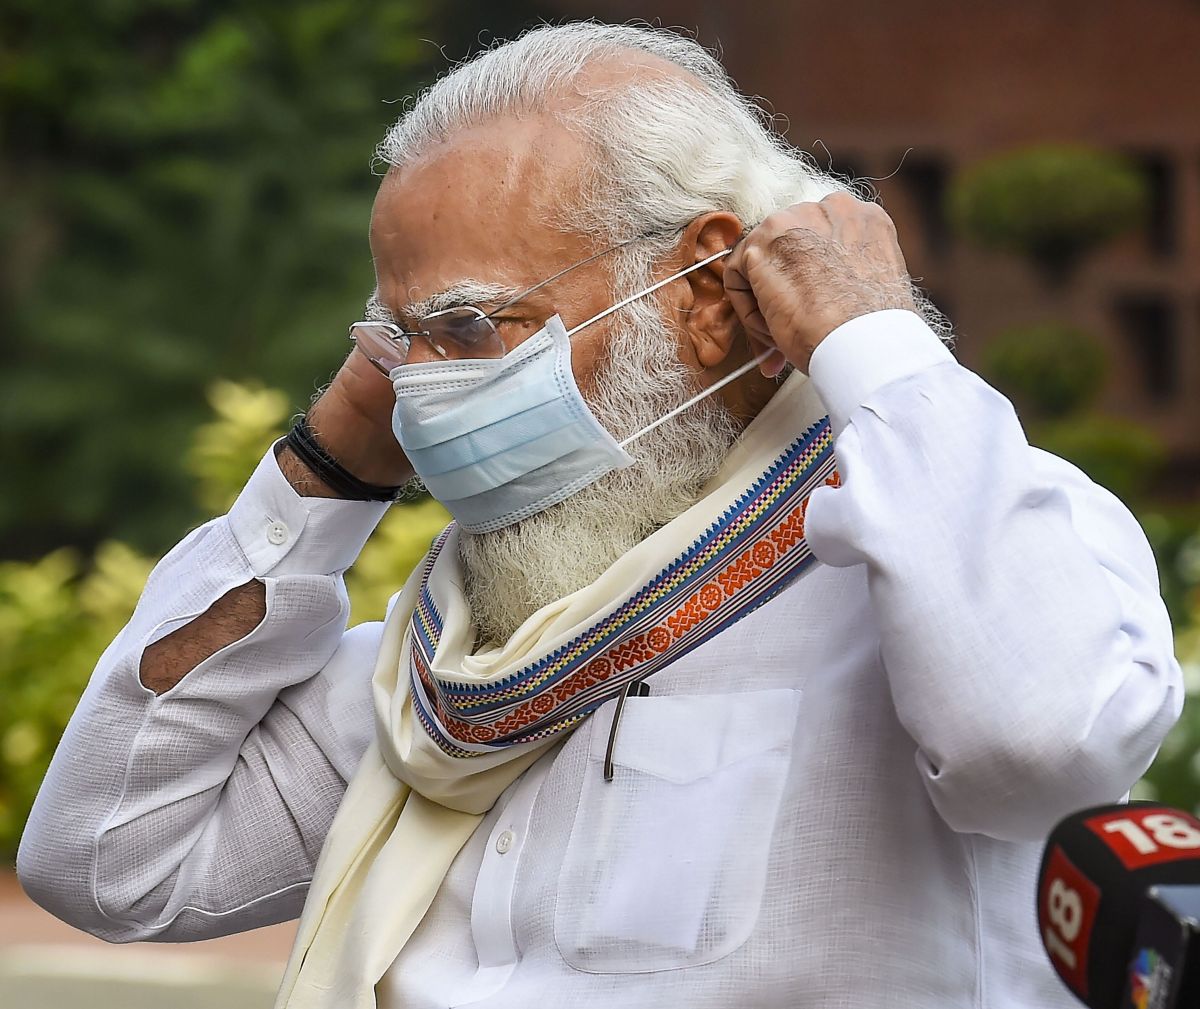 PM Modi wants people to wear masks, maintain distancing as birthday gift - Rediff.com India News